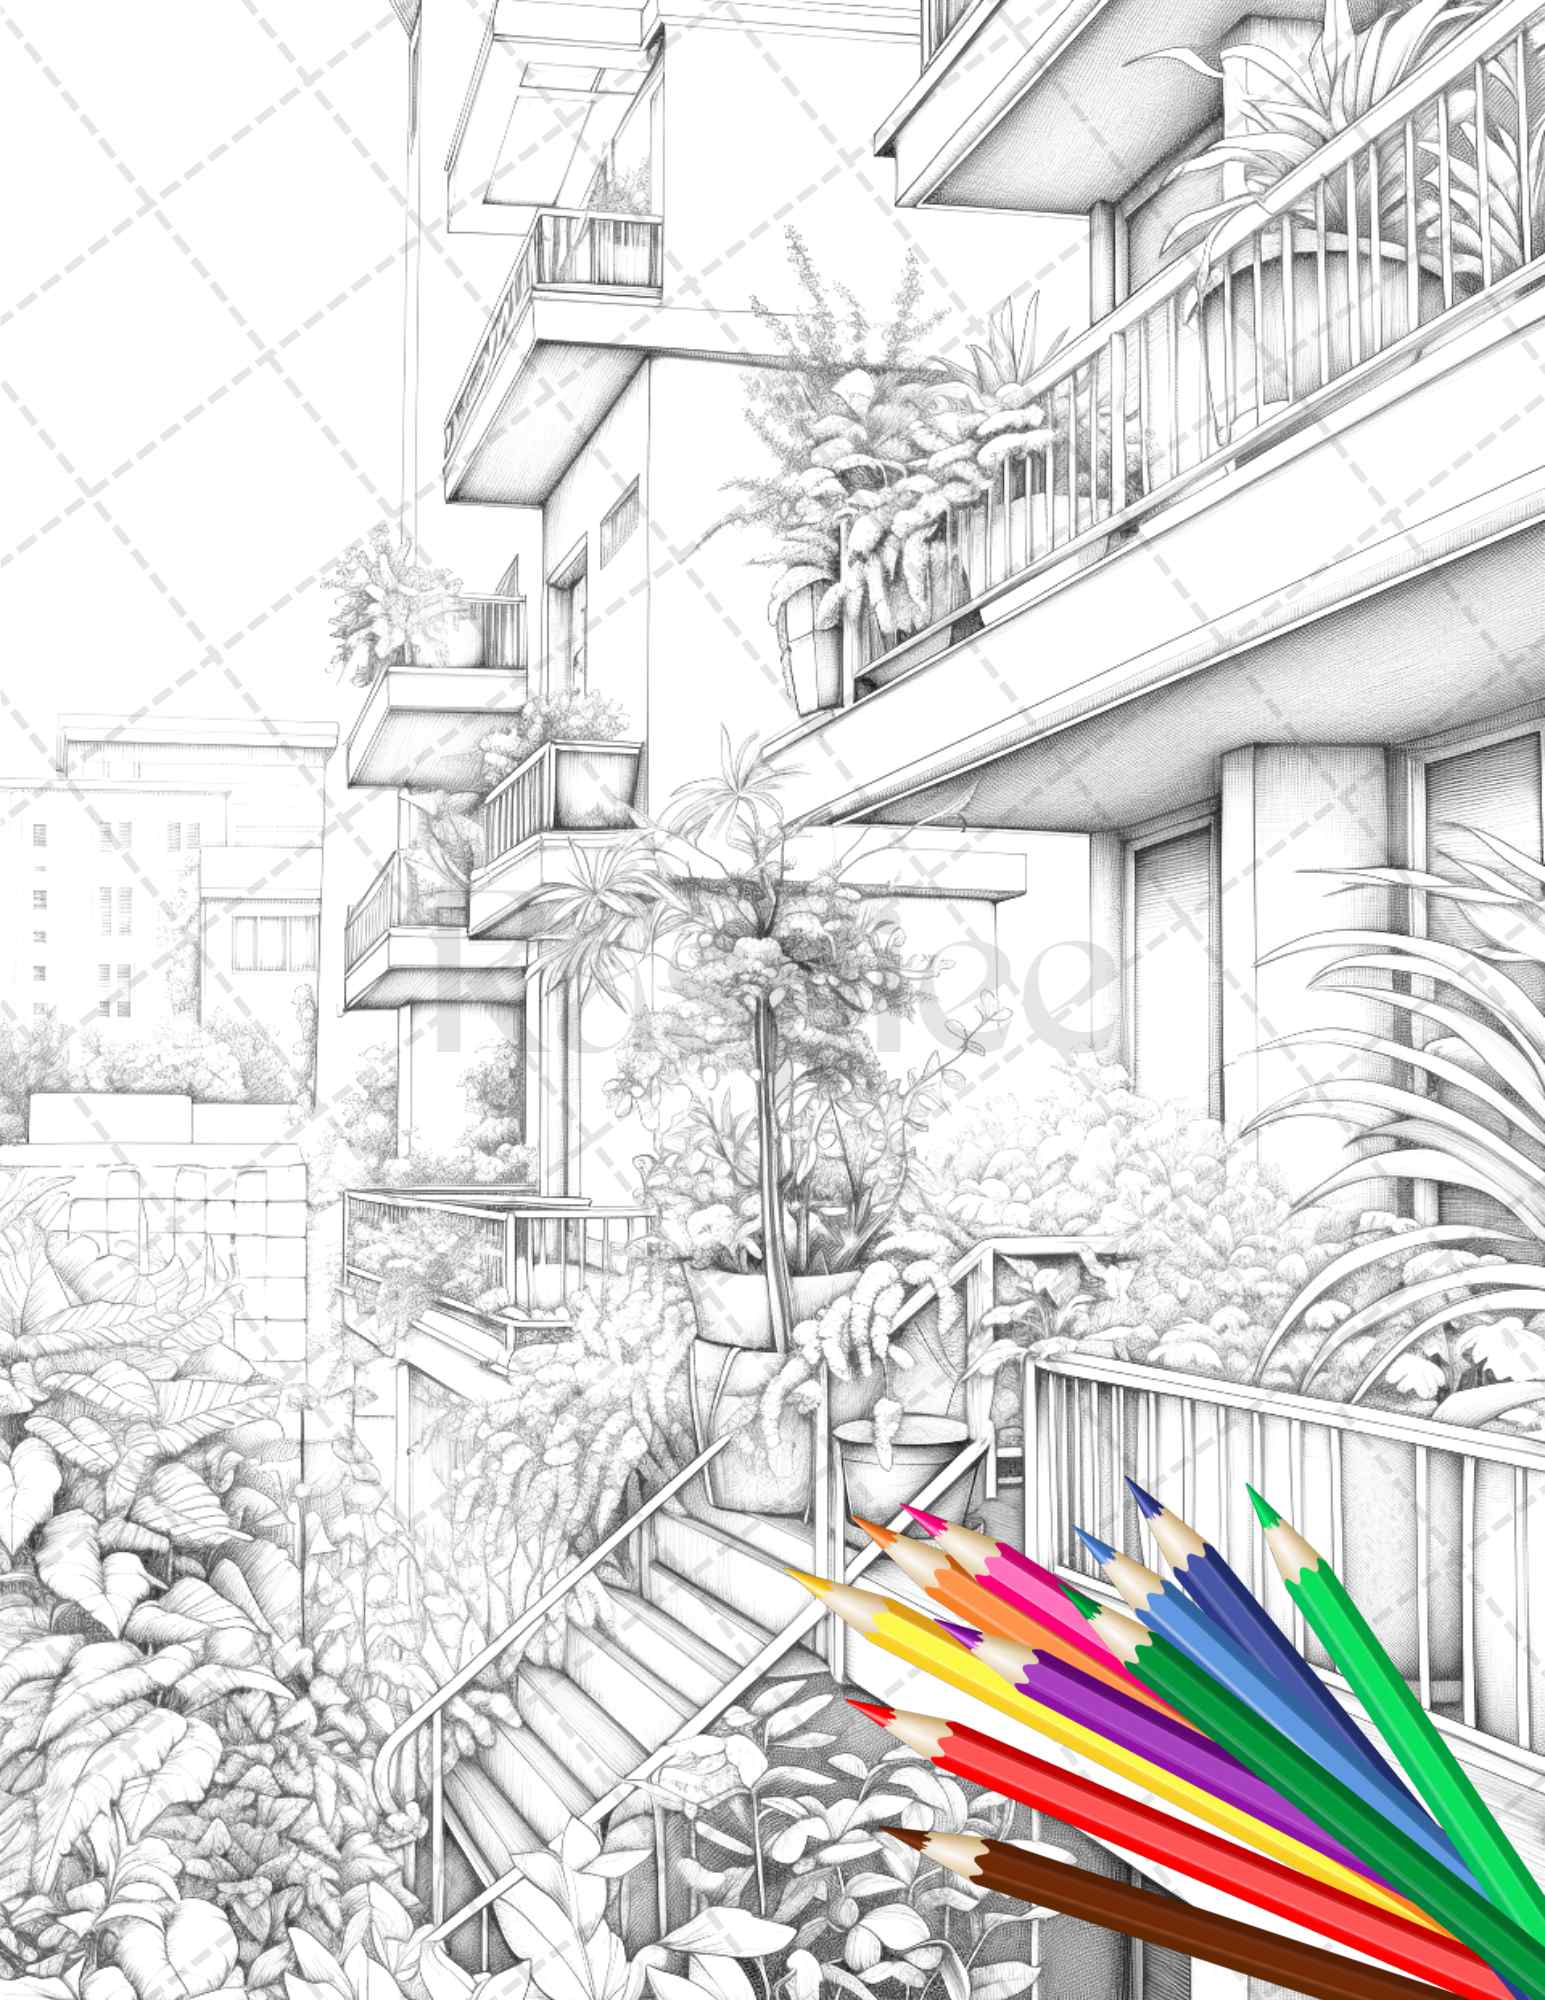 Charming Balcony Garden Grayscale Coloring Pages Printable for Adults, PDF File Instant Download - raspiee